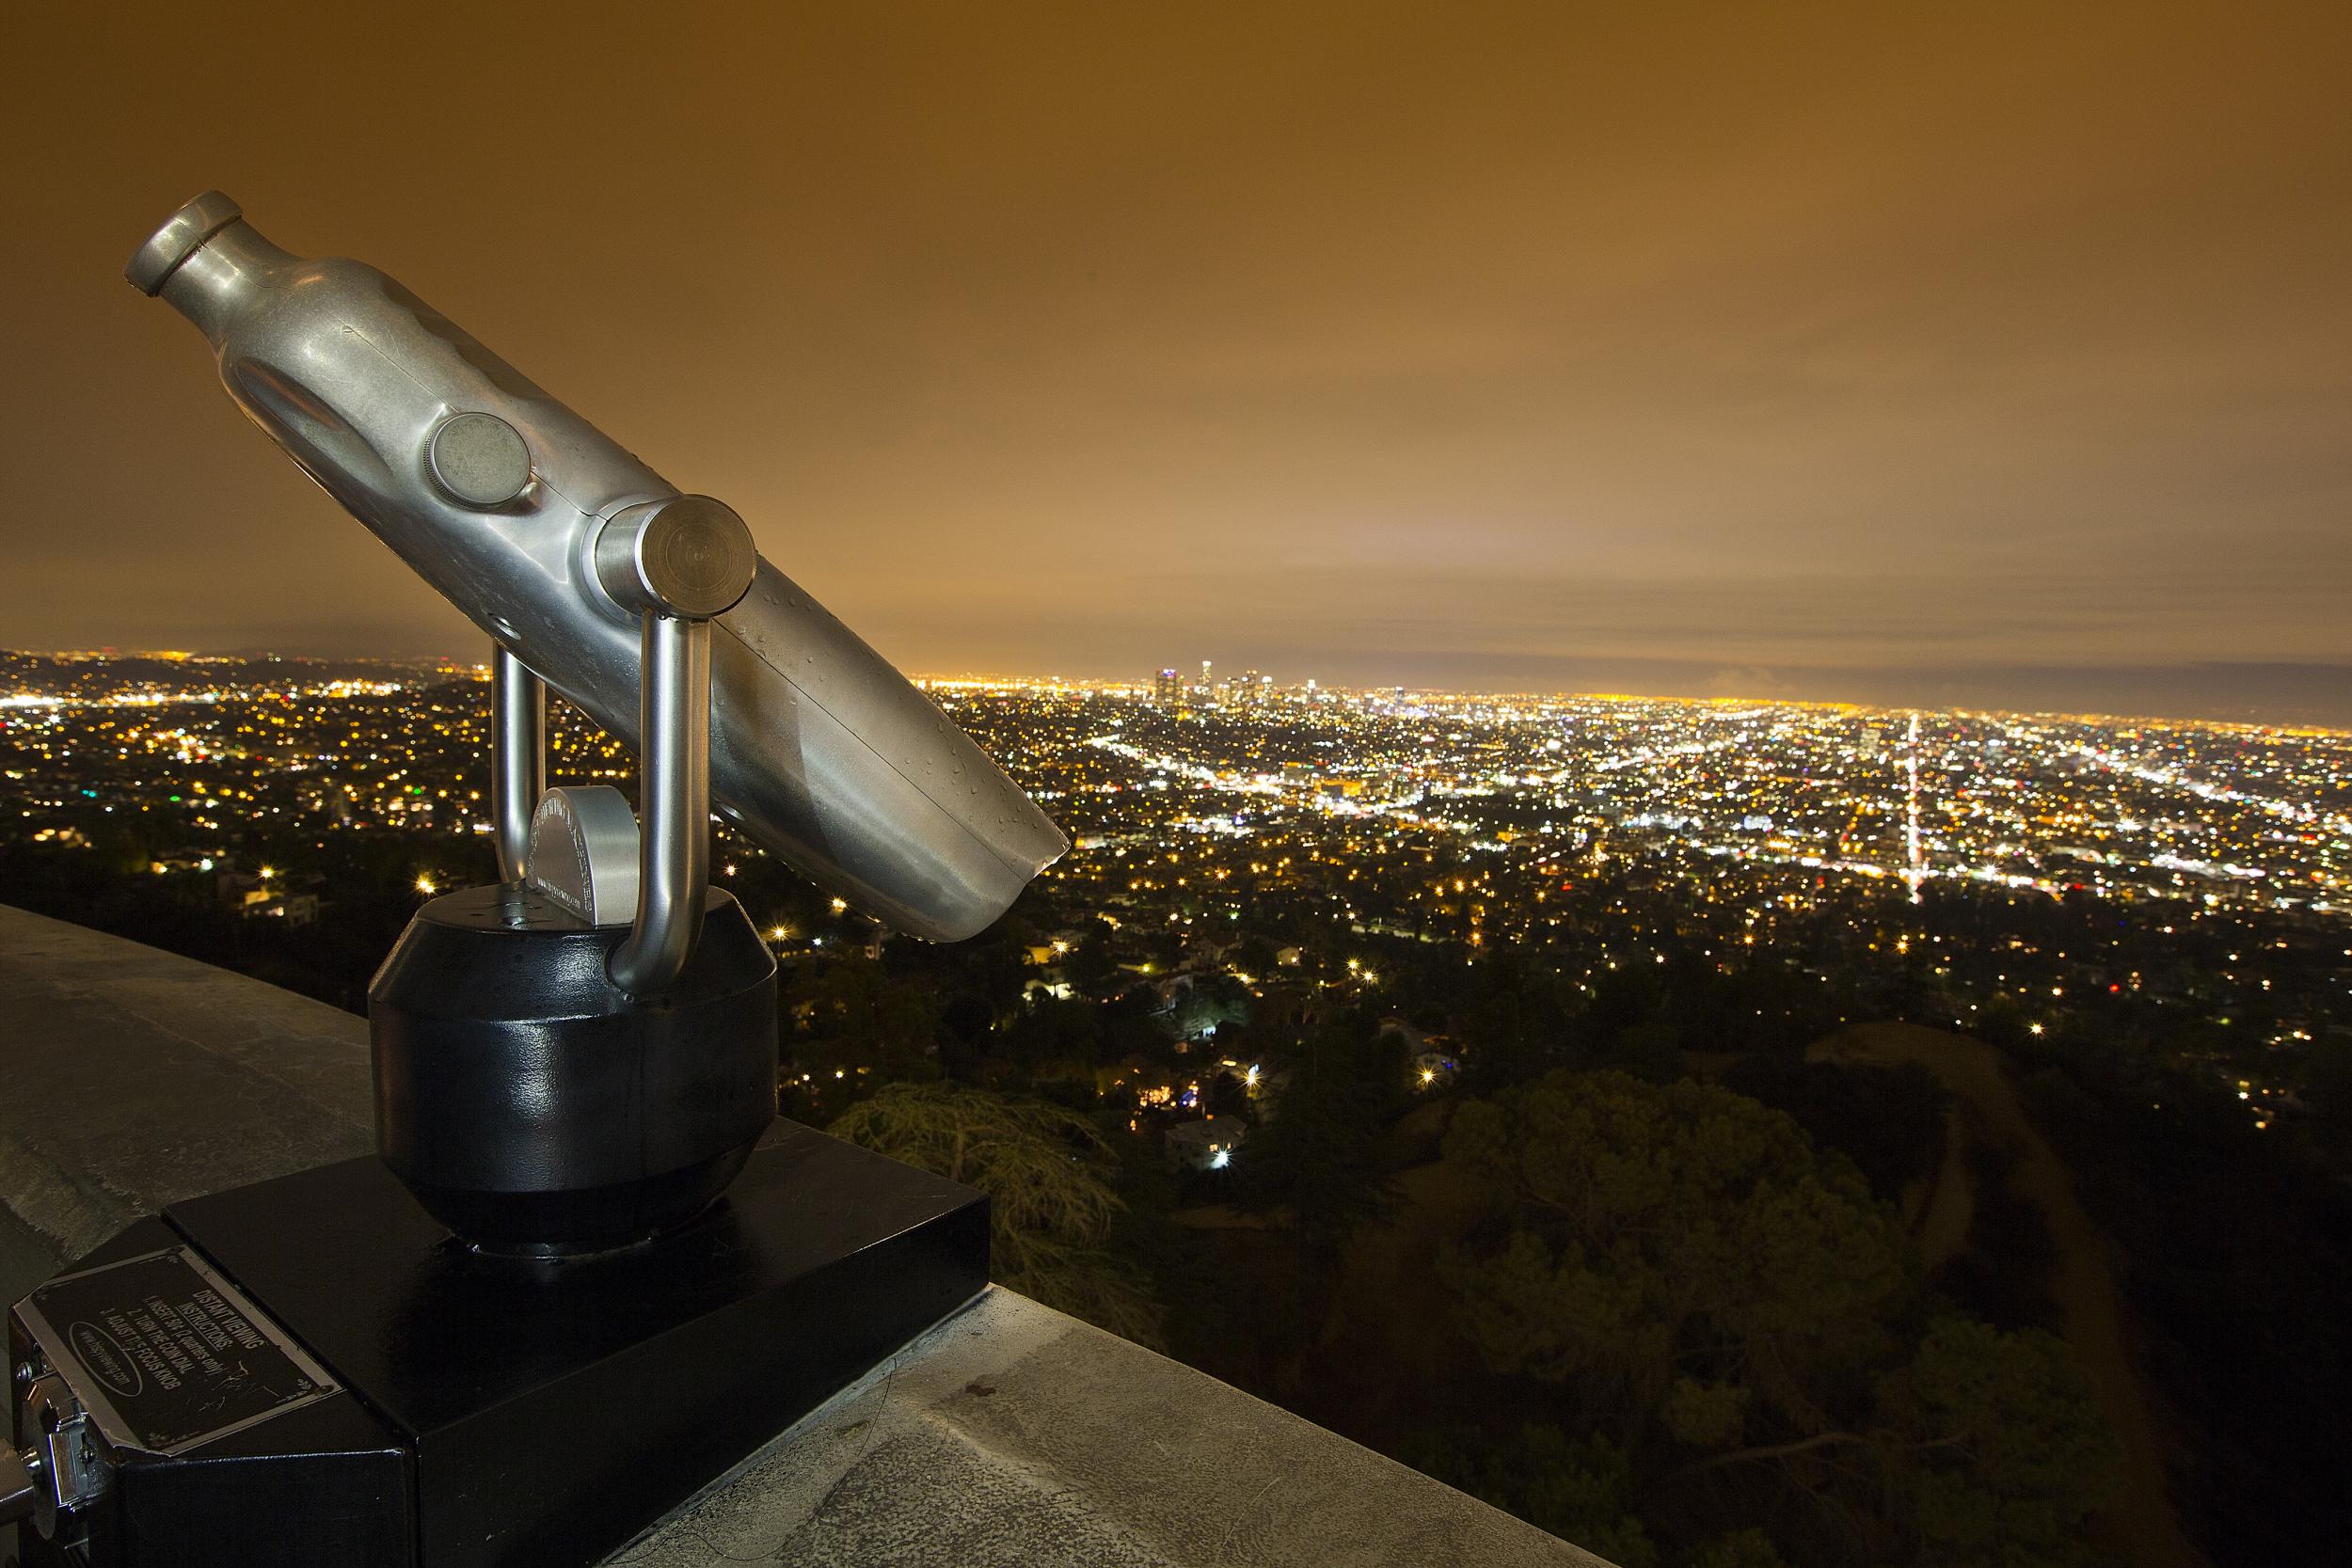 For a look at the stars, check out Griffith Observatory